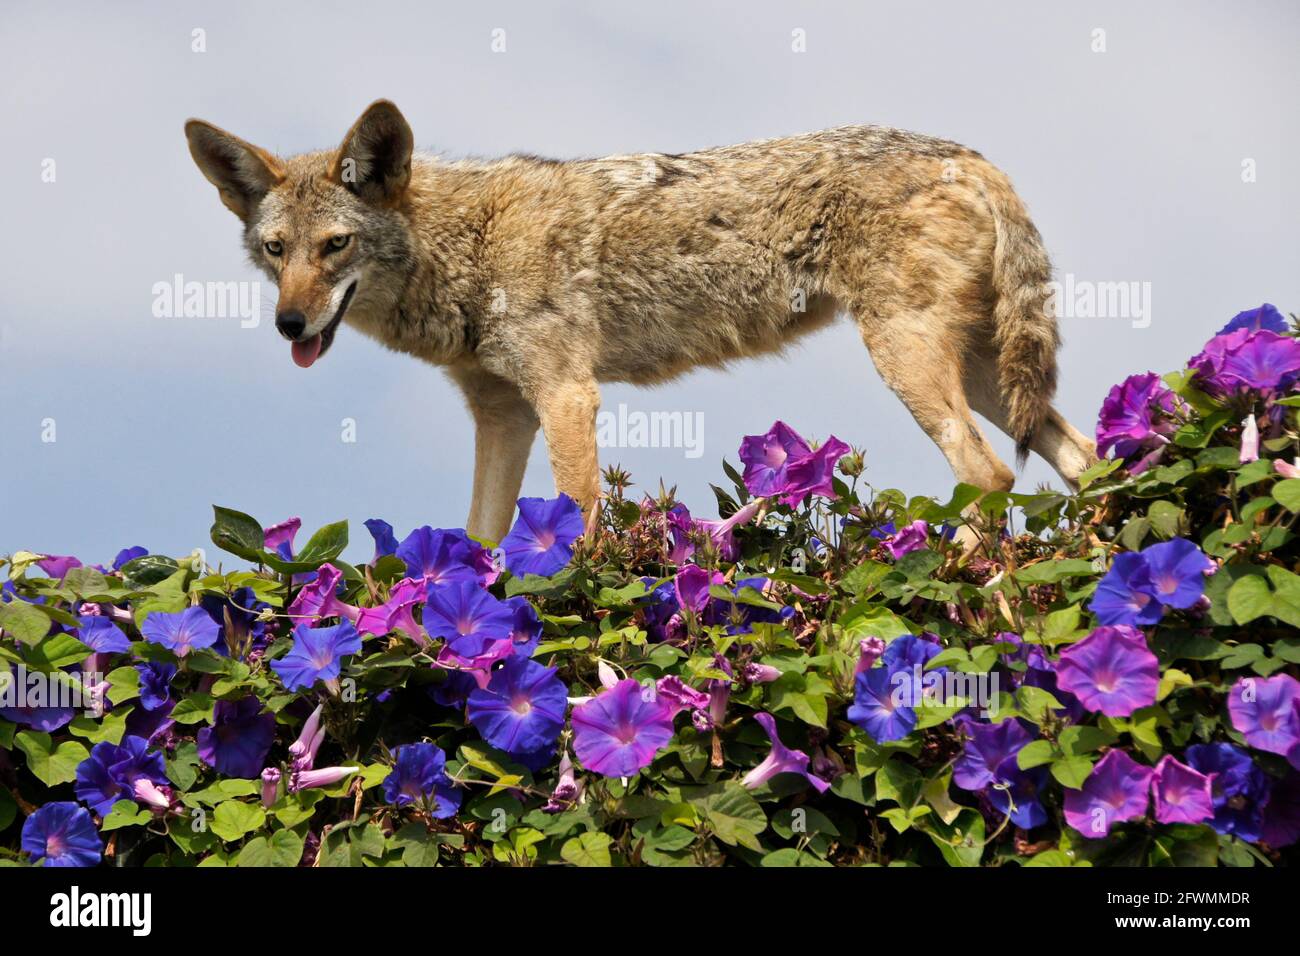 Coyote standing on top of wall covered in morning glories, Huntington Beach, Orange County, California Stock Photo